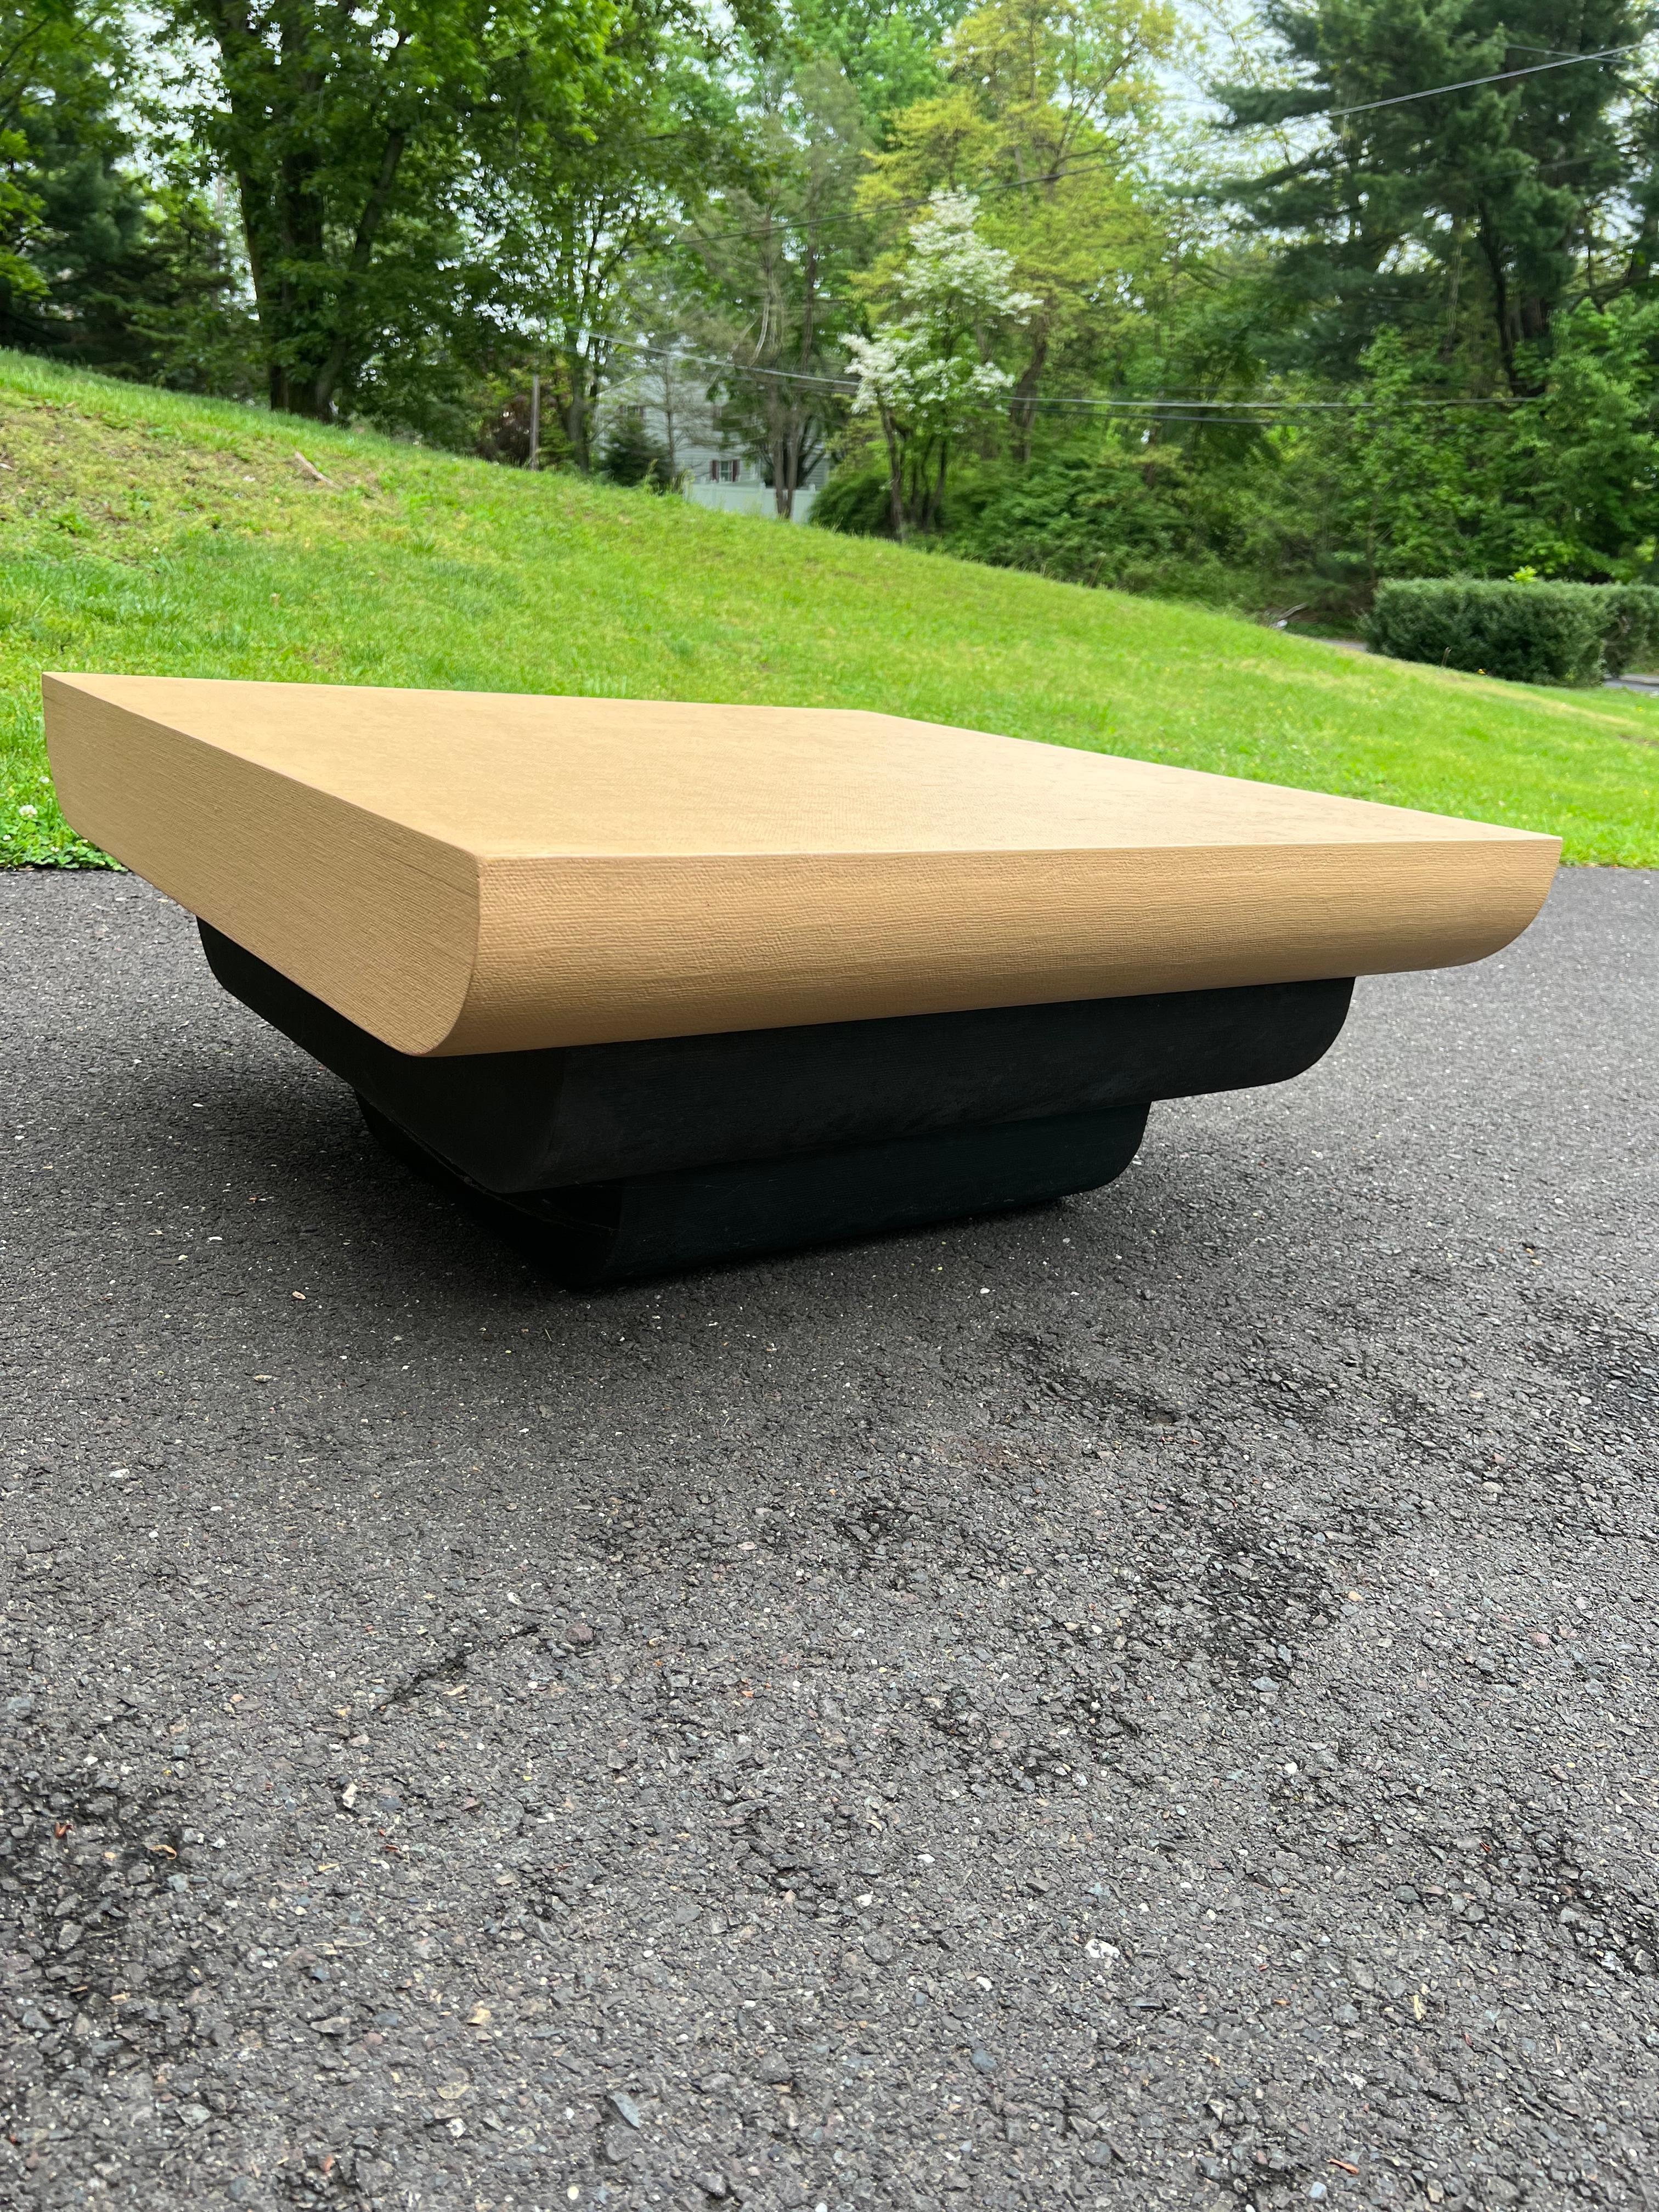 Peach waterfall cascade coffee table with black plinth custom made in 1980s

Couple brown paint marks on one side of the coffee table. Otherwise fantastic vintage condition